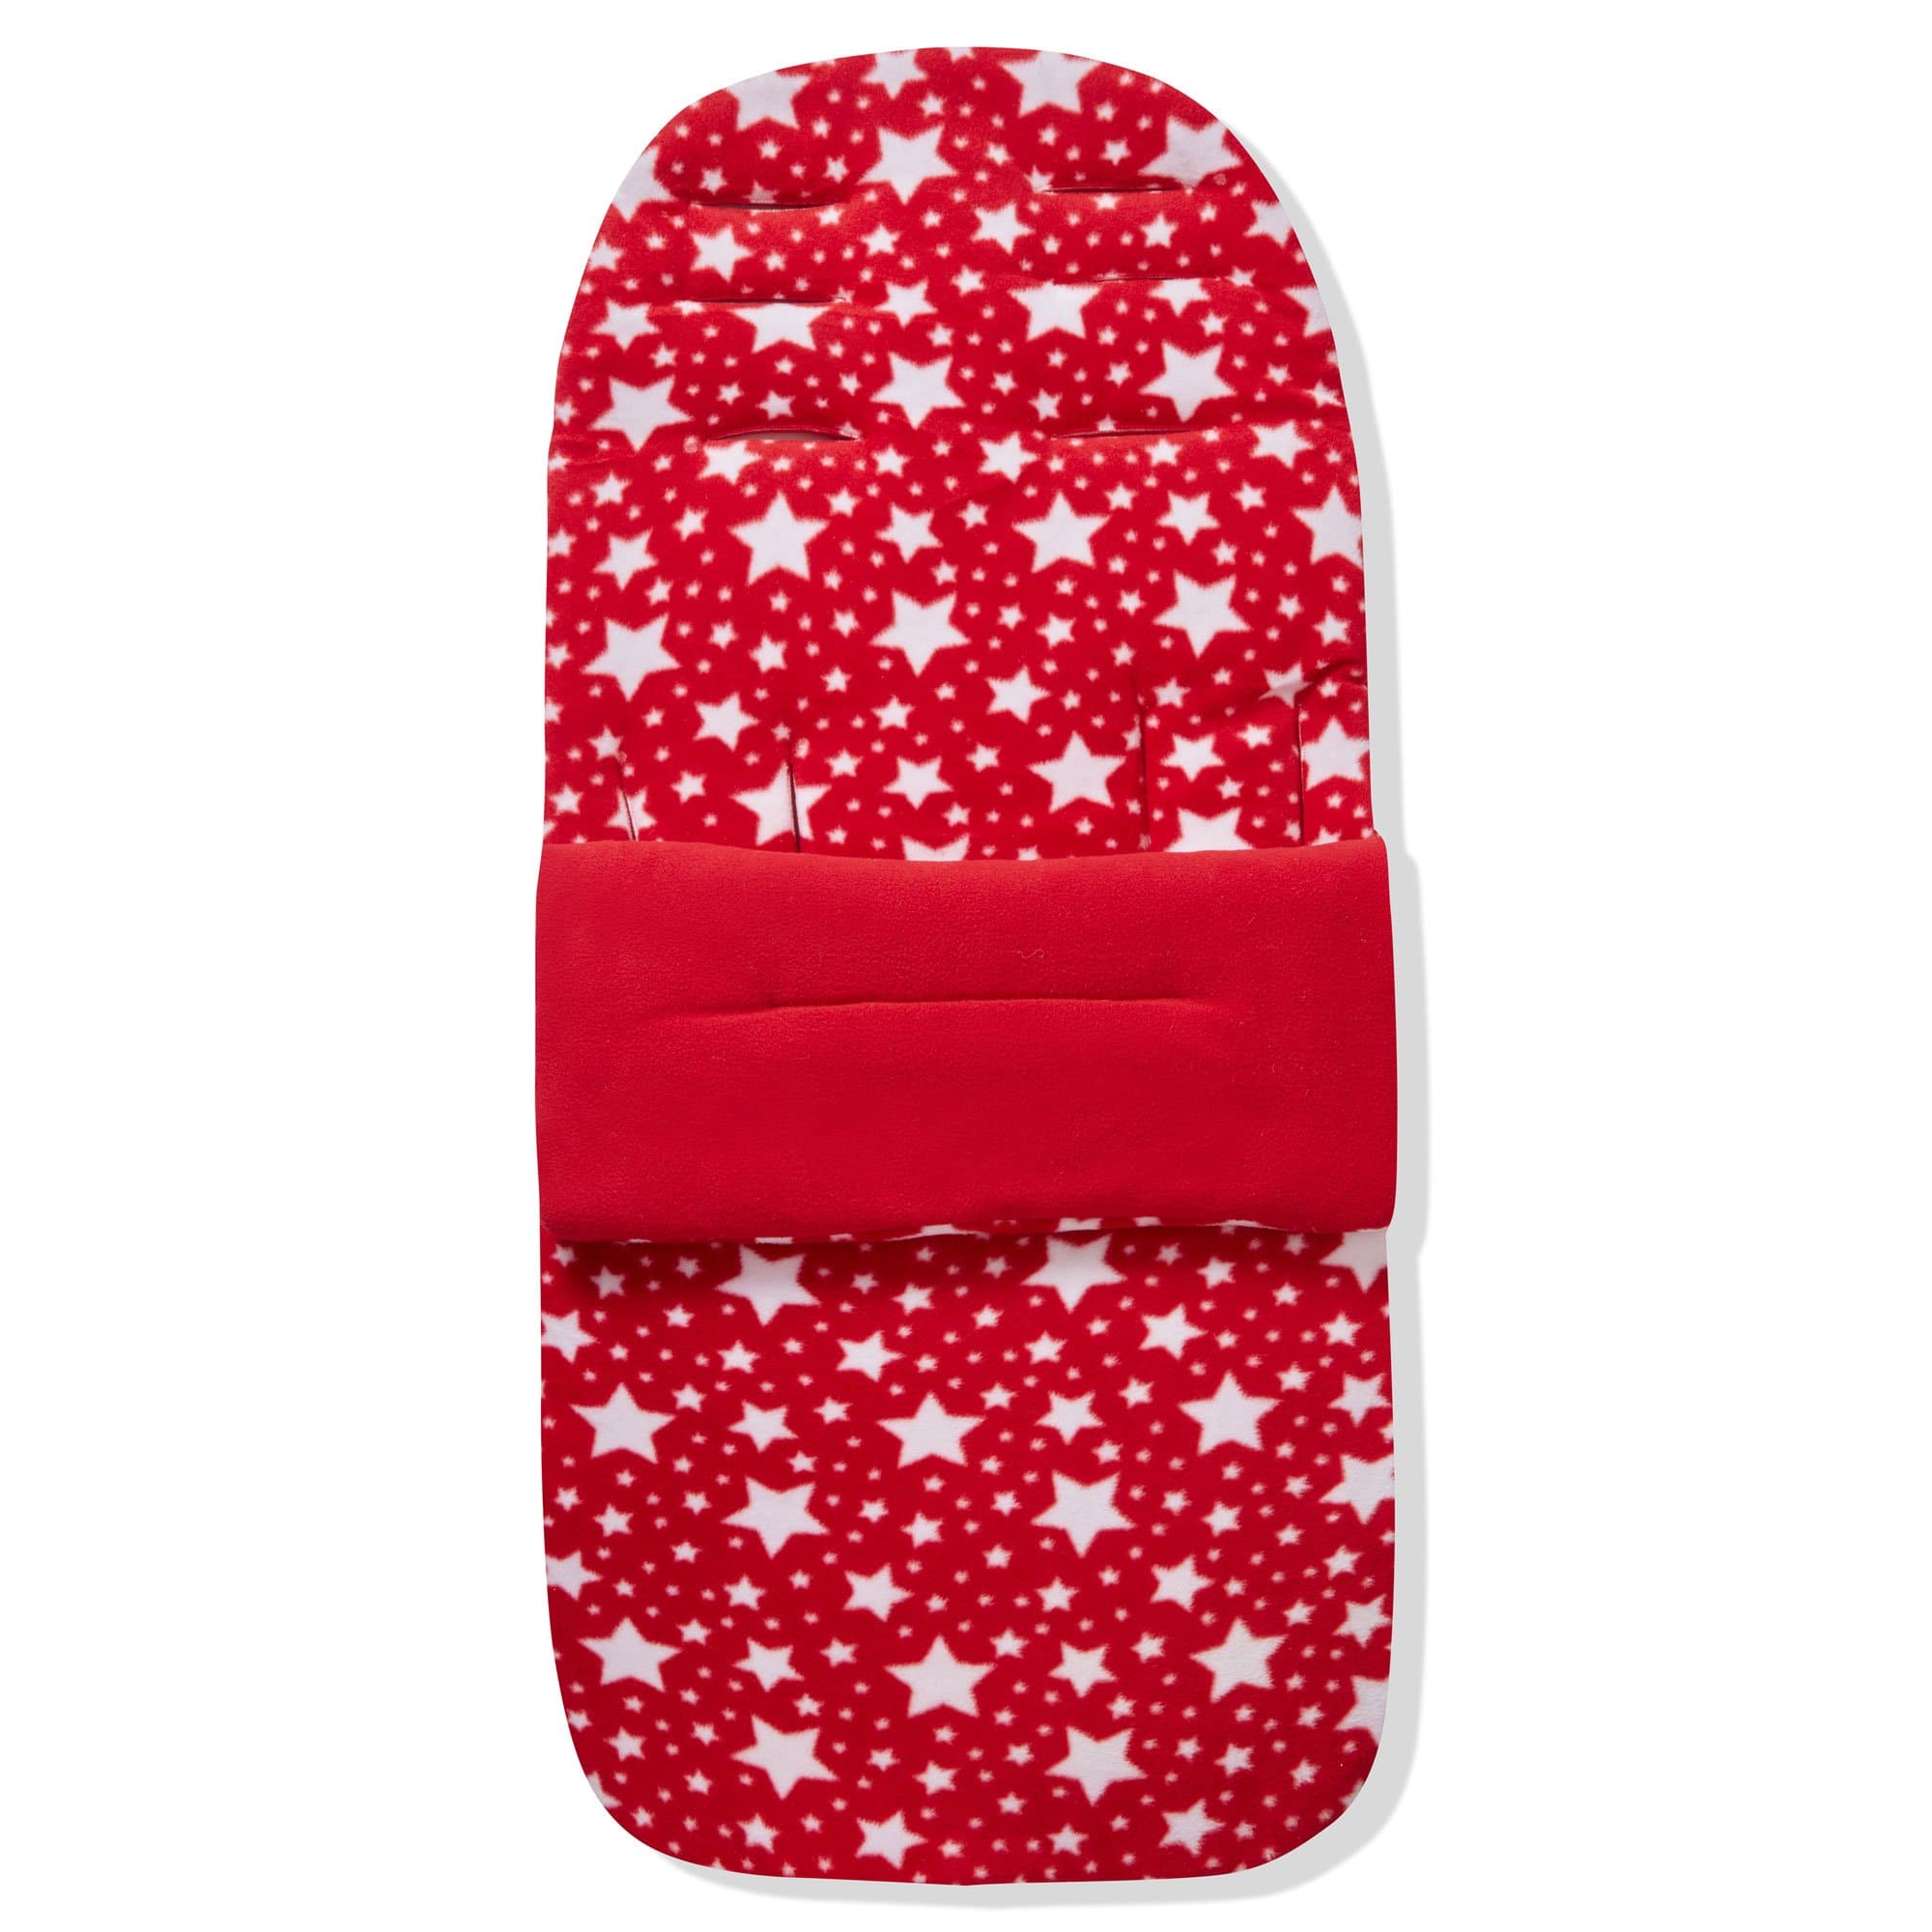 Fleece Footmuff / Cosy Toes Compatible with NeoNato - Red Star / Fits All Models | For Your Little One